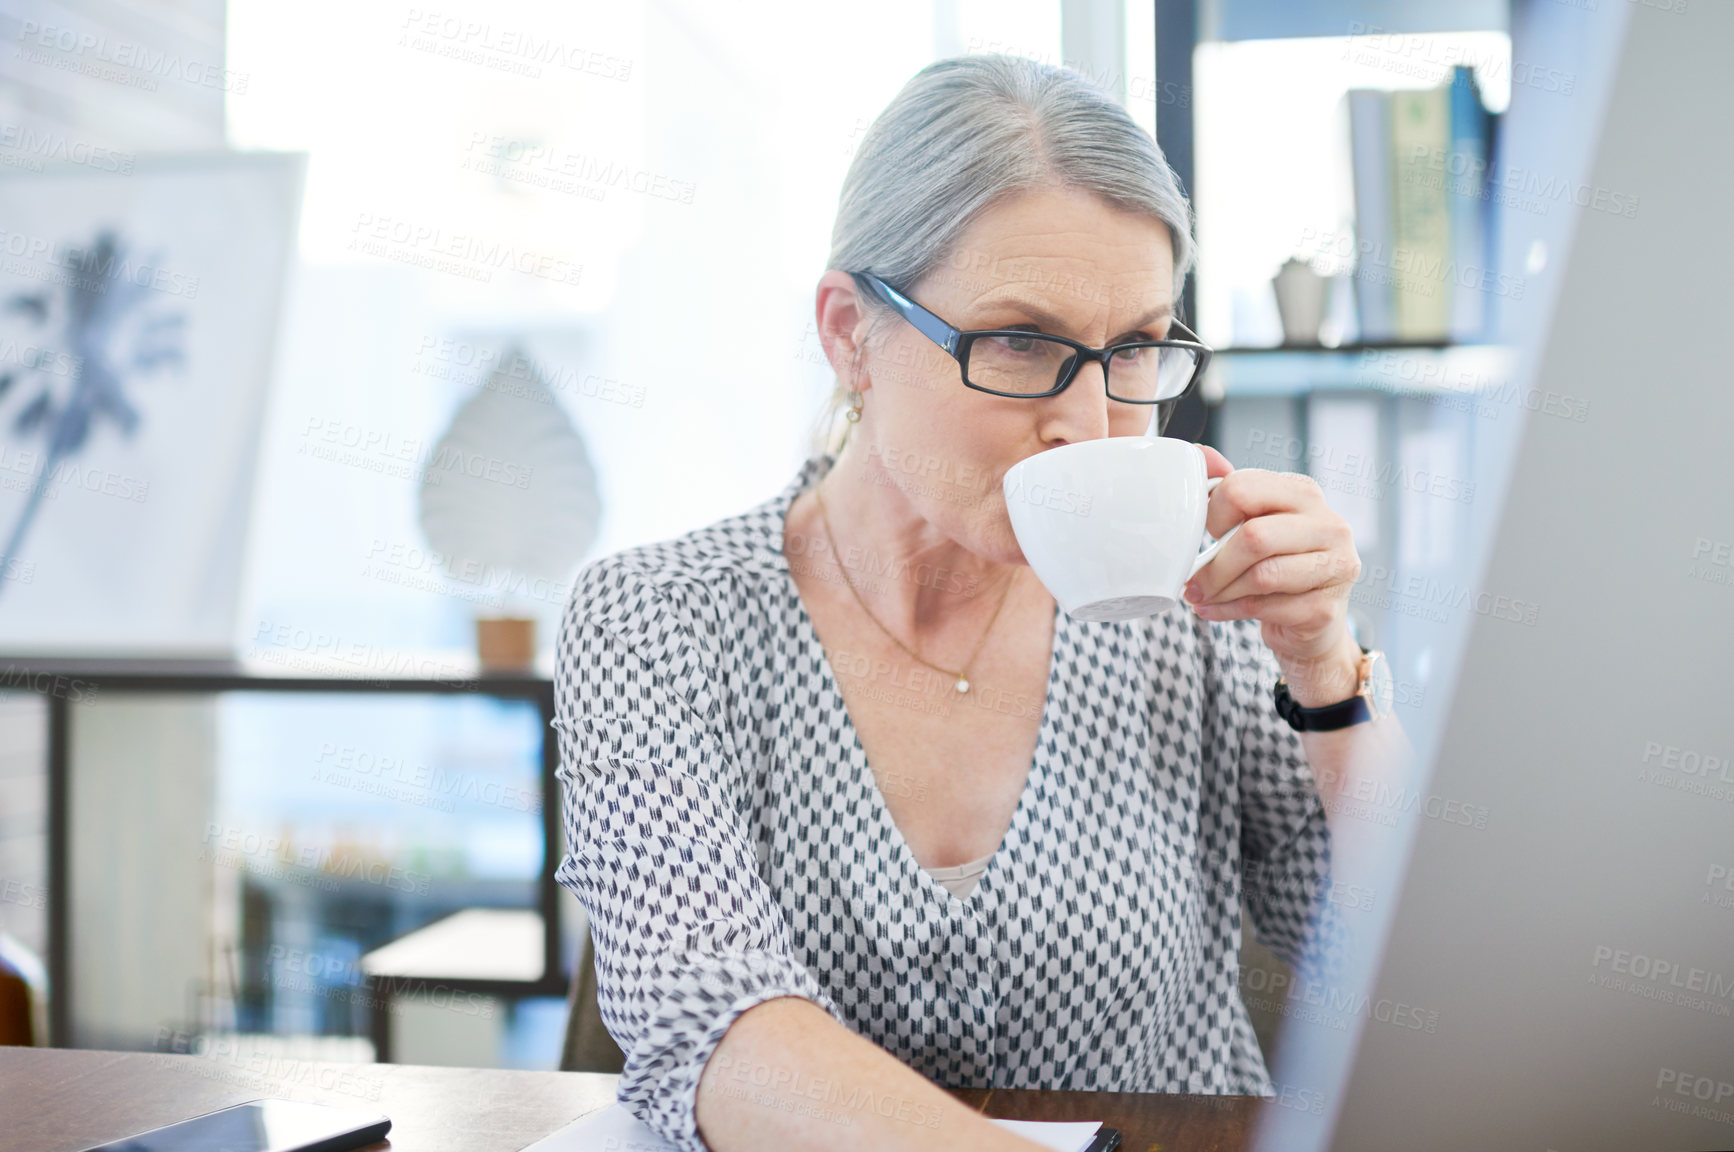 Buy stock photo Shot of a mature businesswoman drinking tea while working on a computer in an office